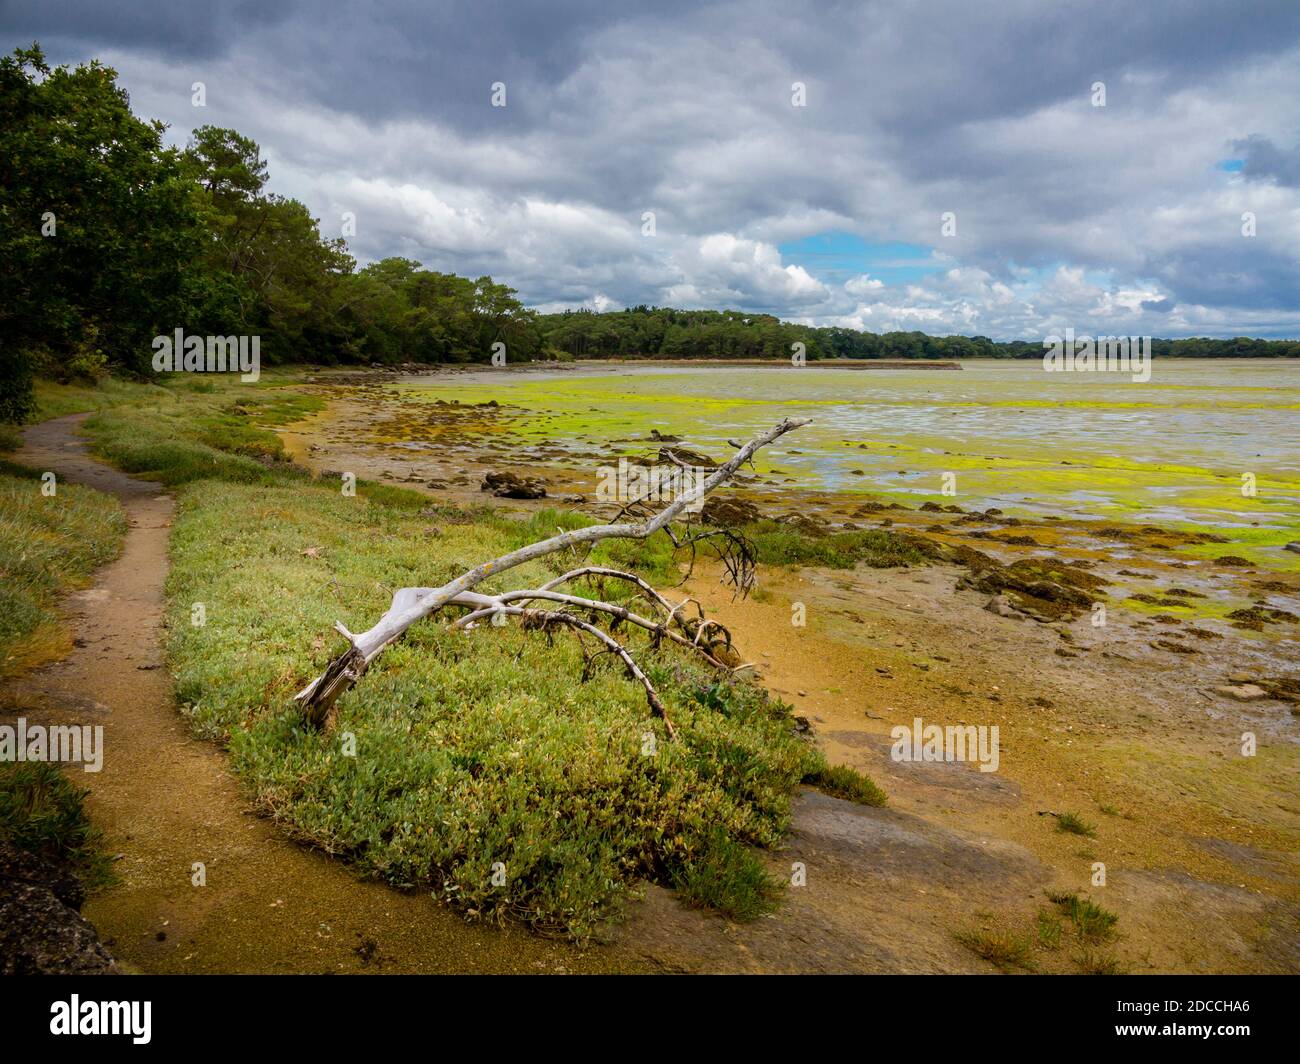 The estuary of the Pont L'Abbe river in Finistere Brittany north west France. Stock Photo